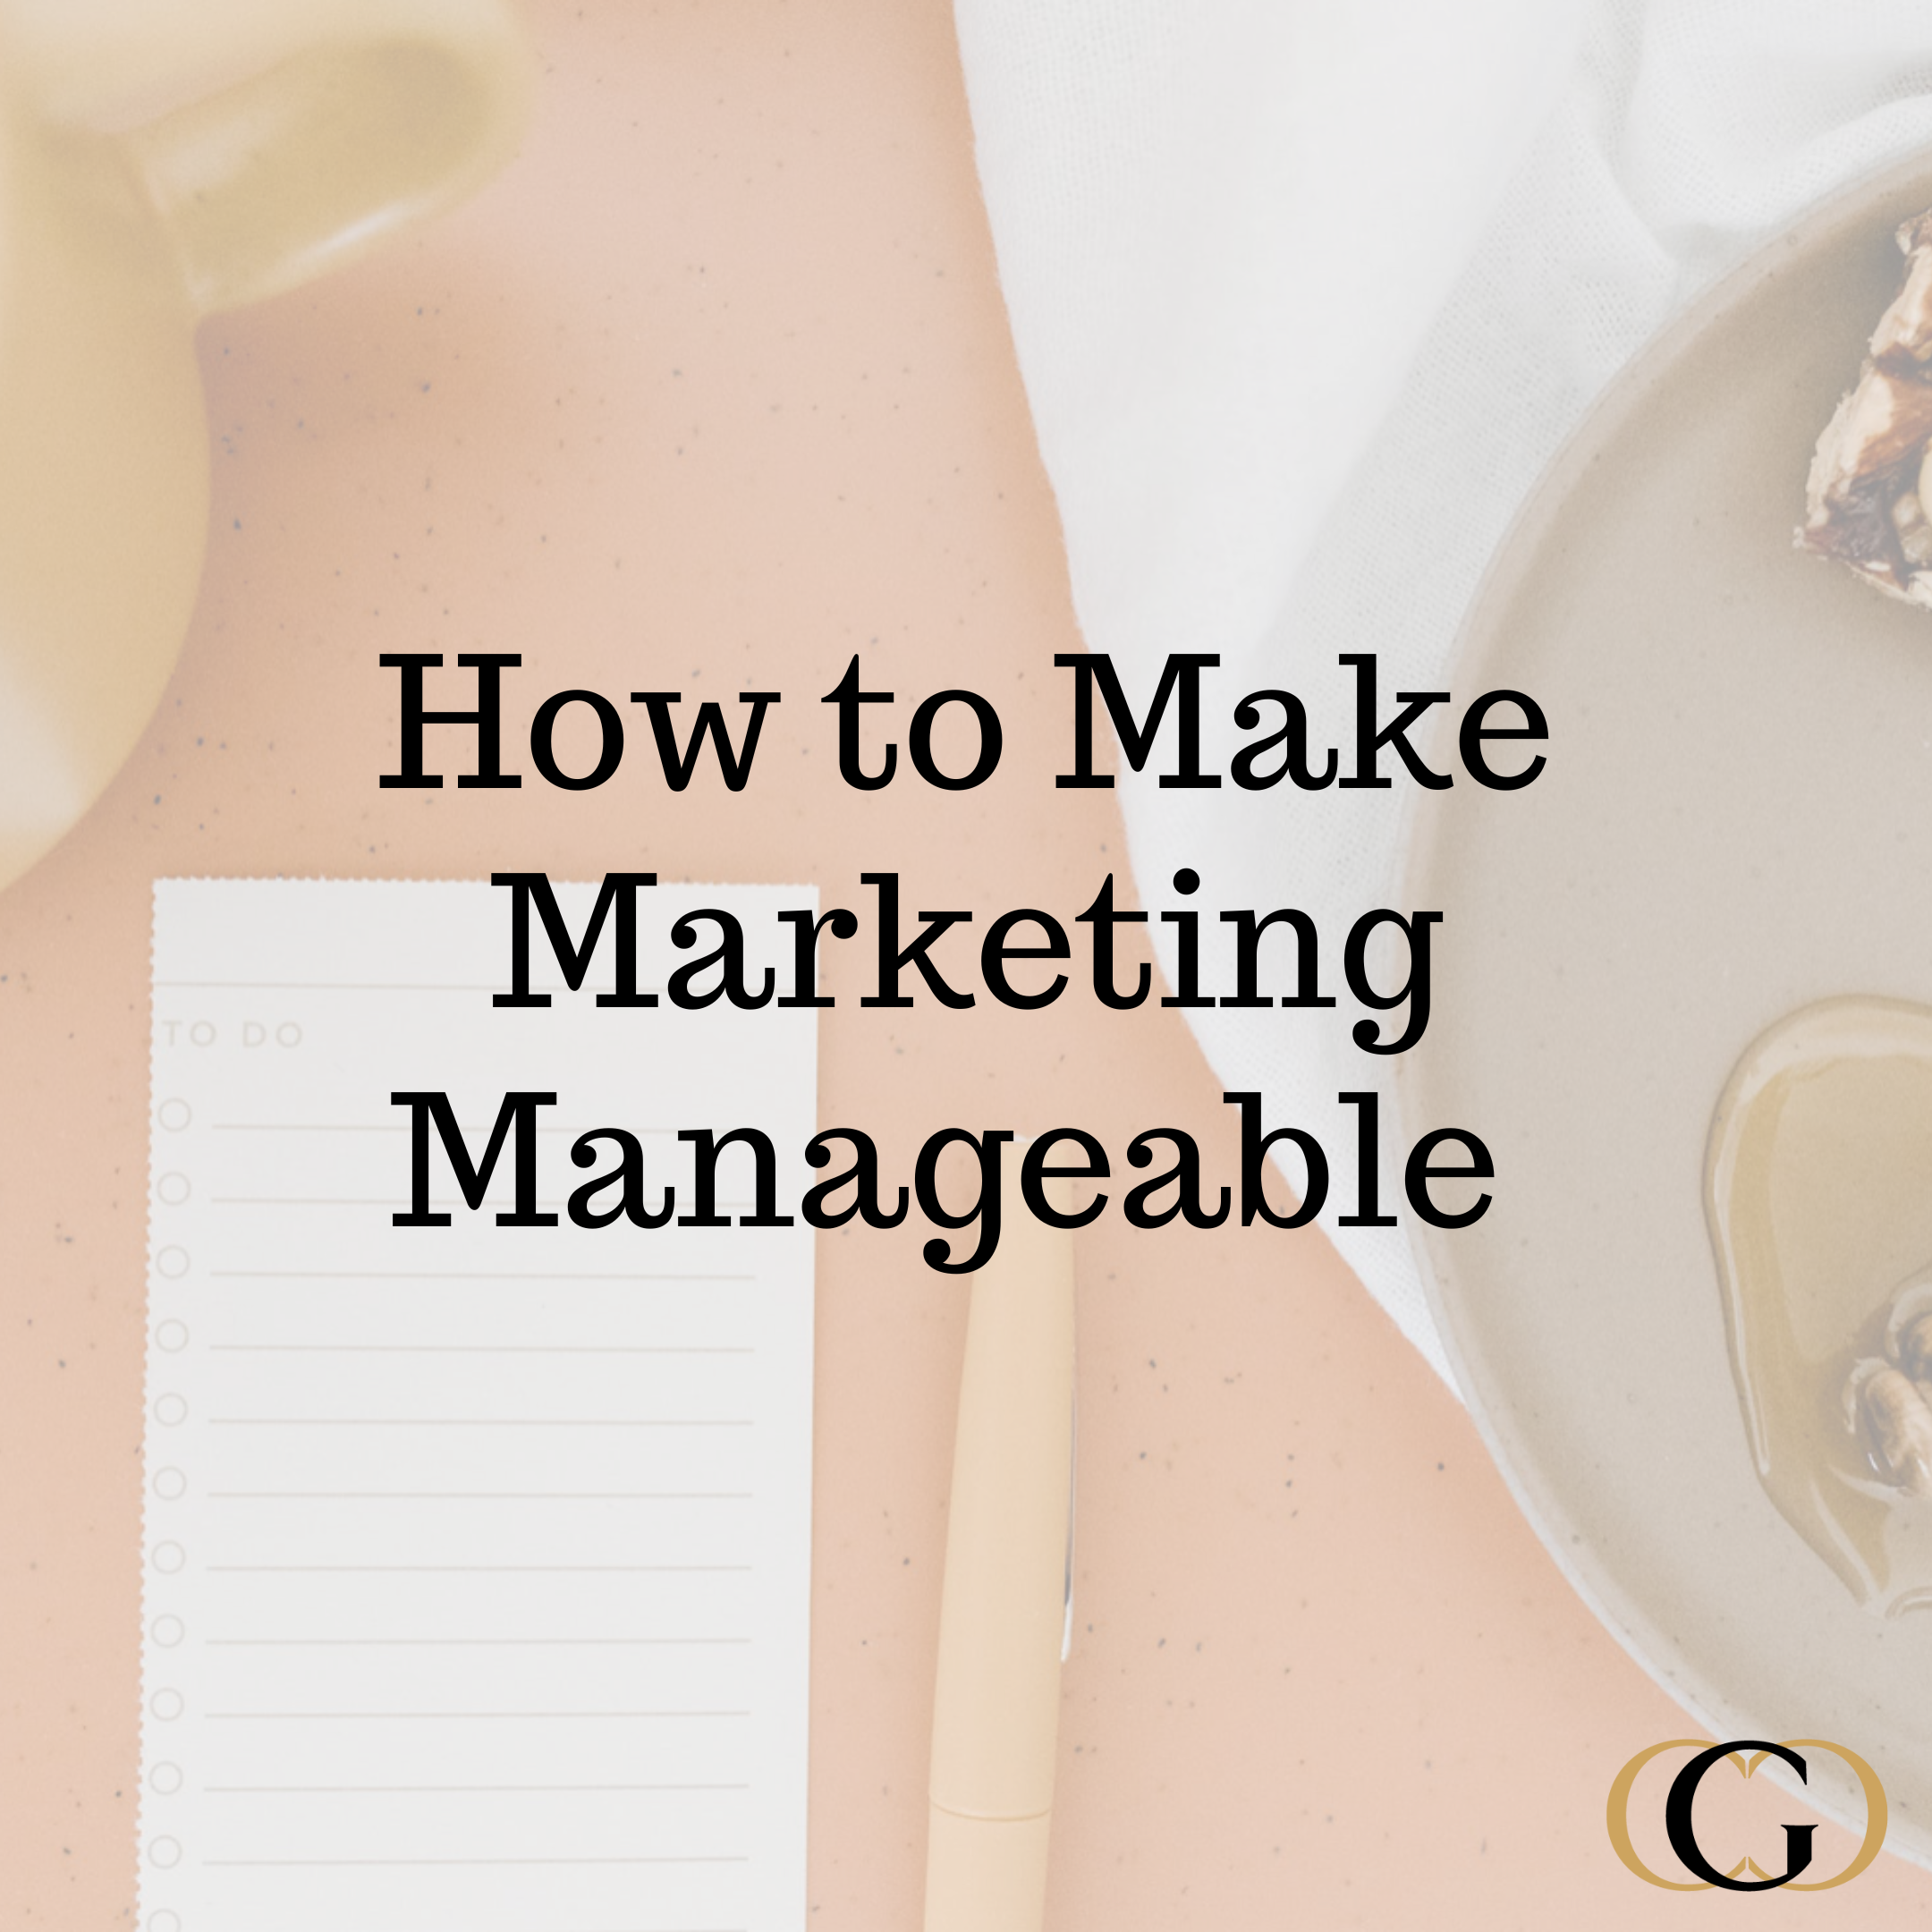 How to Make Marketing Manageable